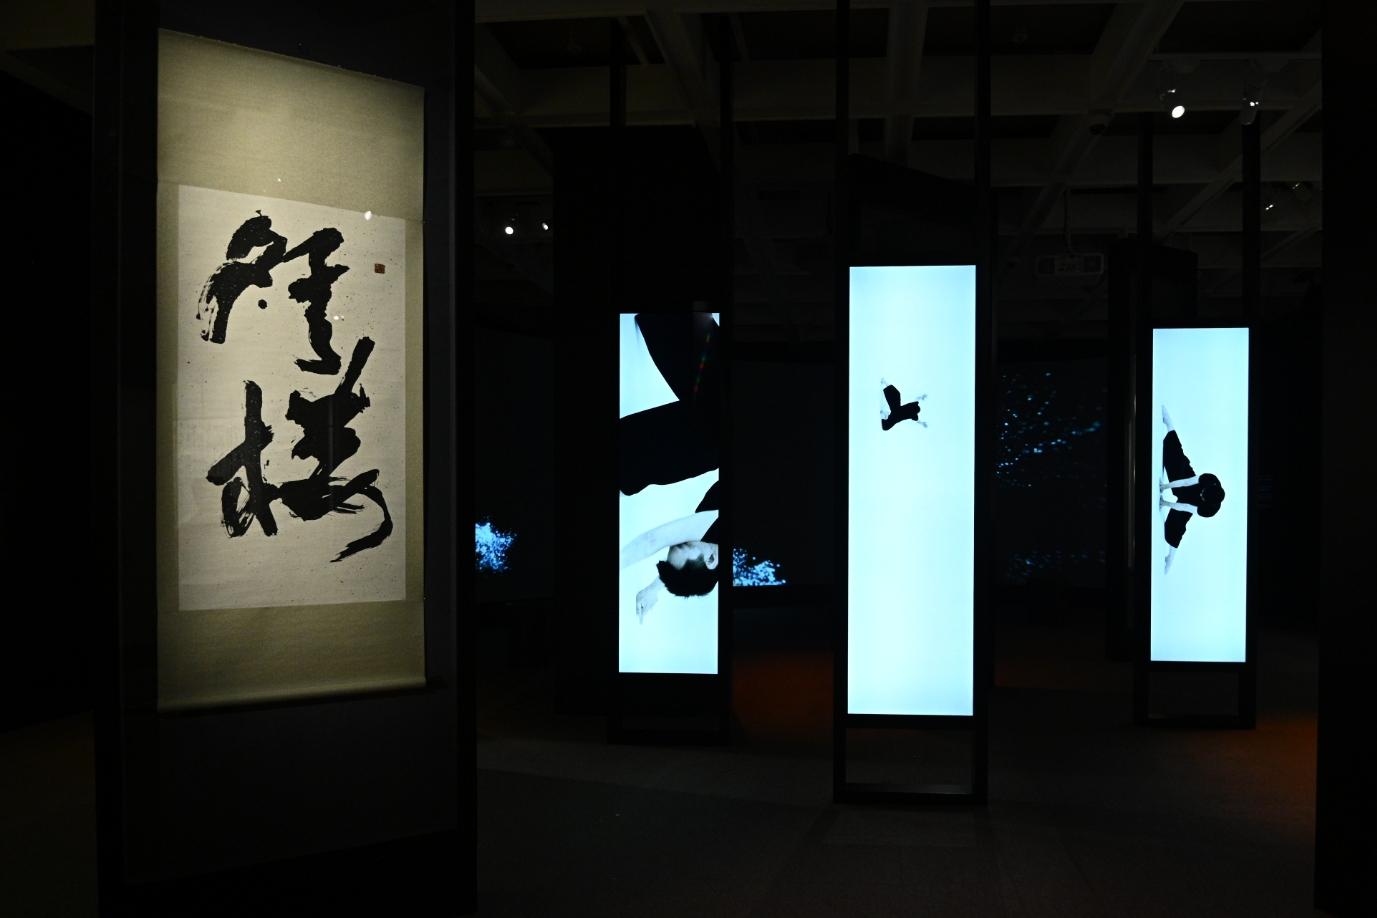 The "City Rhymes: The Melodious Notes of Calligraphy" exhibition will be held from tomorrow (July 22) at the Hong Kong Museum of Art. Photo shows artist Ip Hoi's calligraphy "'Deng Lou' in cursive script" (left) and dance videos created by director Cheuk Cheung and choreographer Ong Yong-lock (right), featuring a dancer who echoes strokes of calligraphy with force, posture, and rhythm.